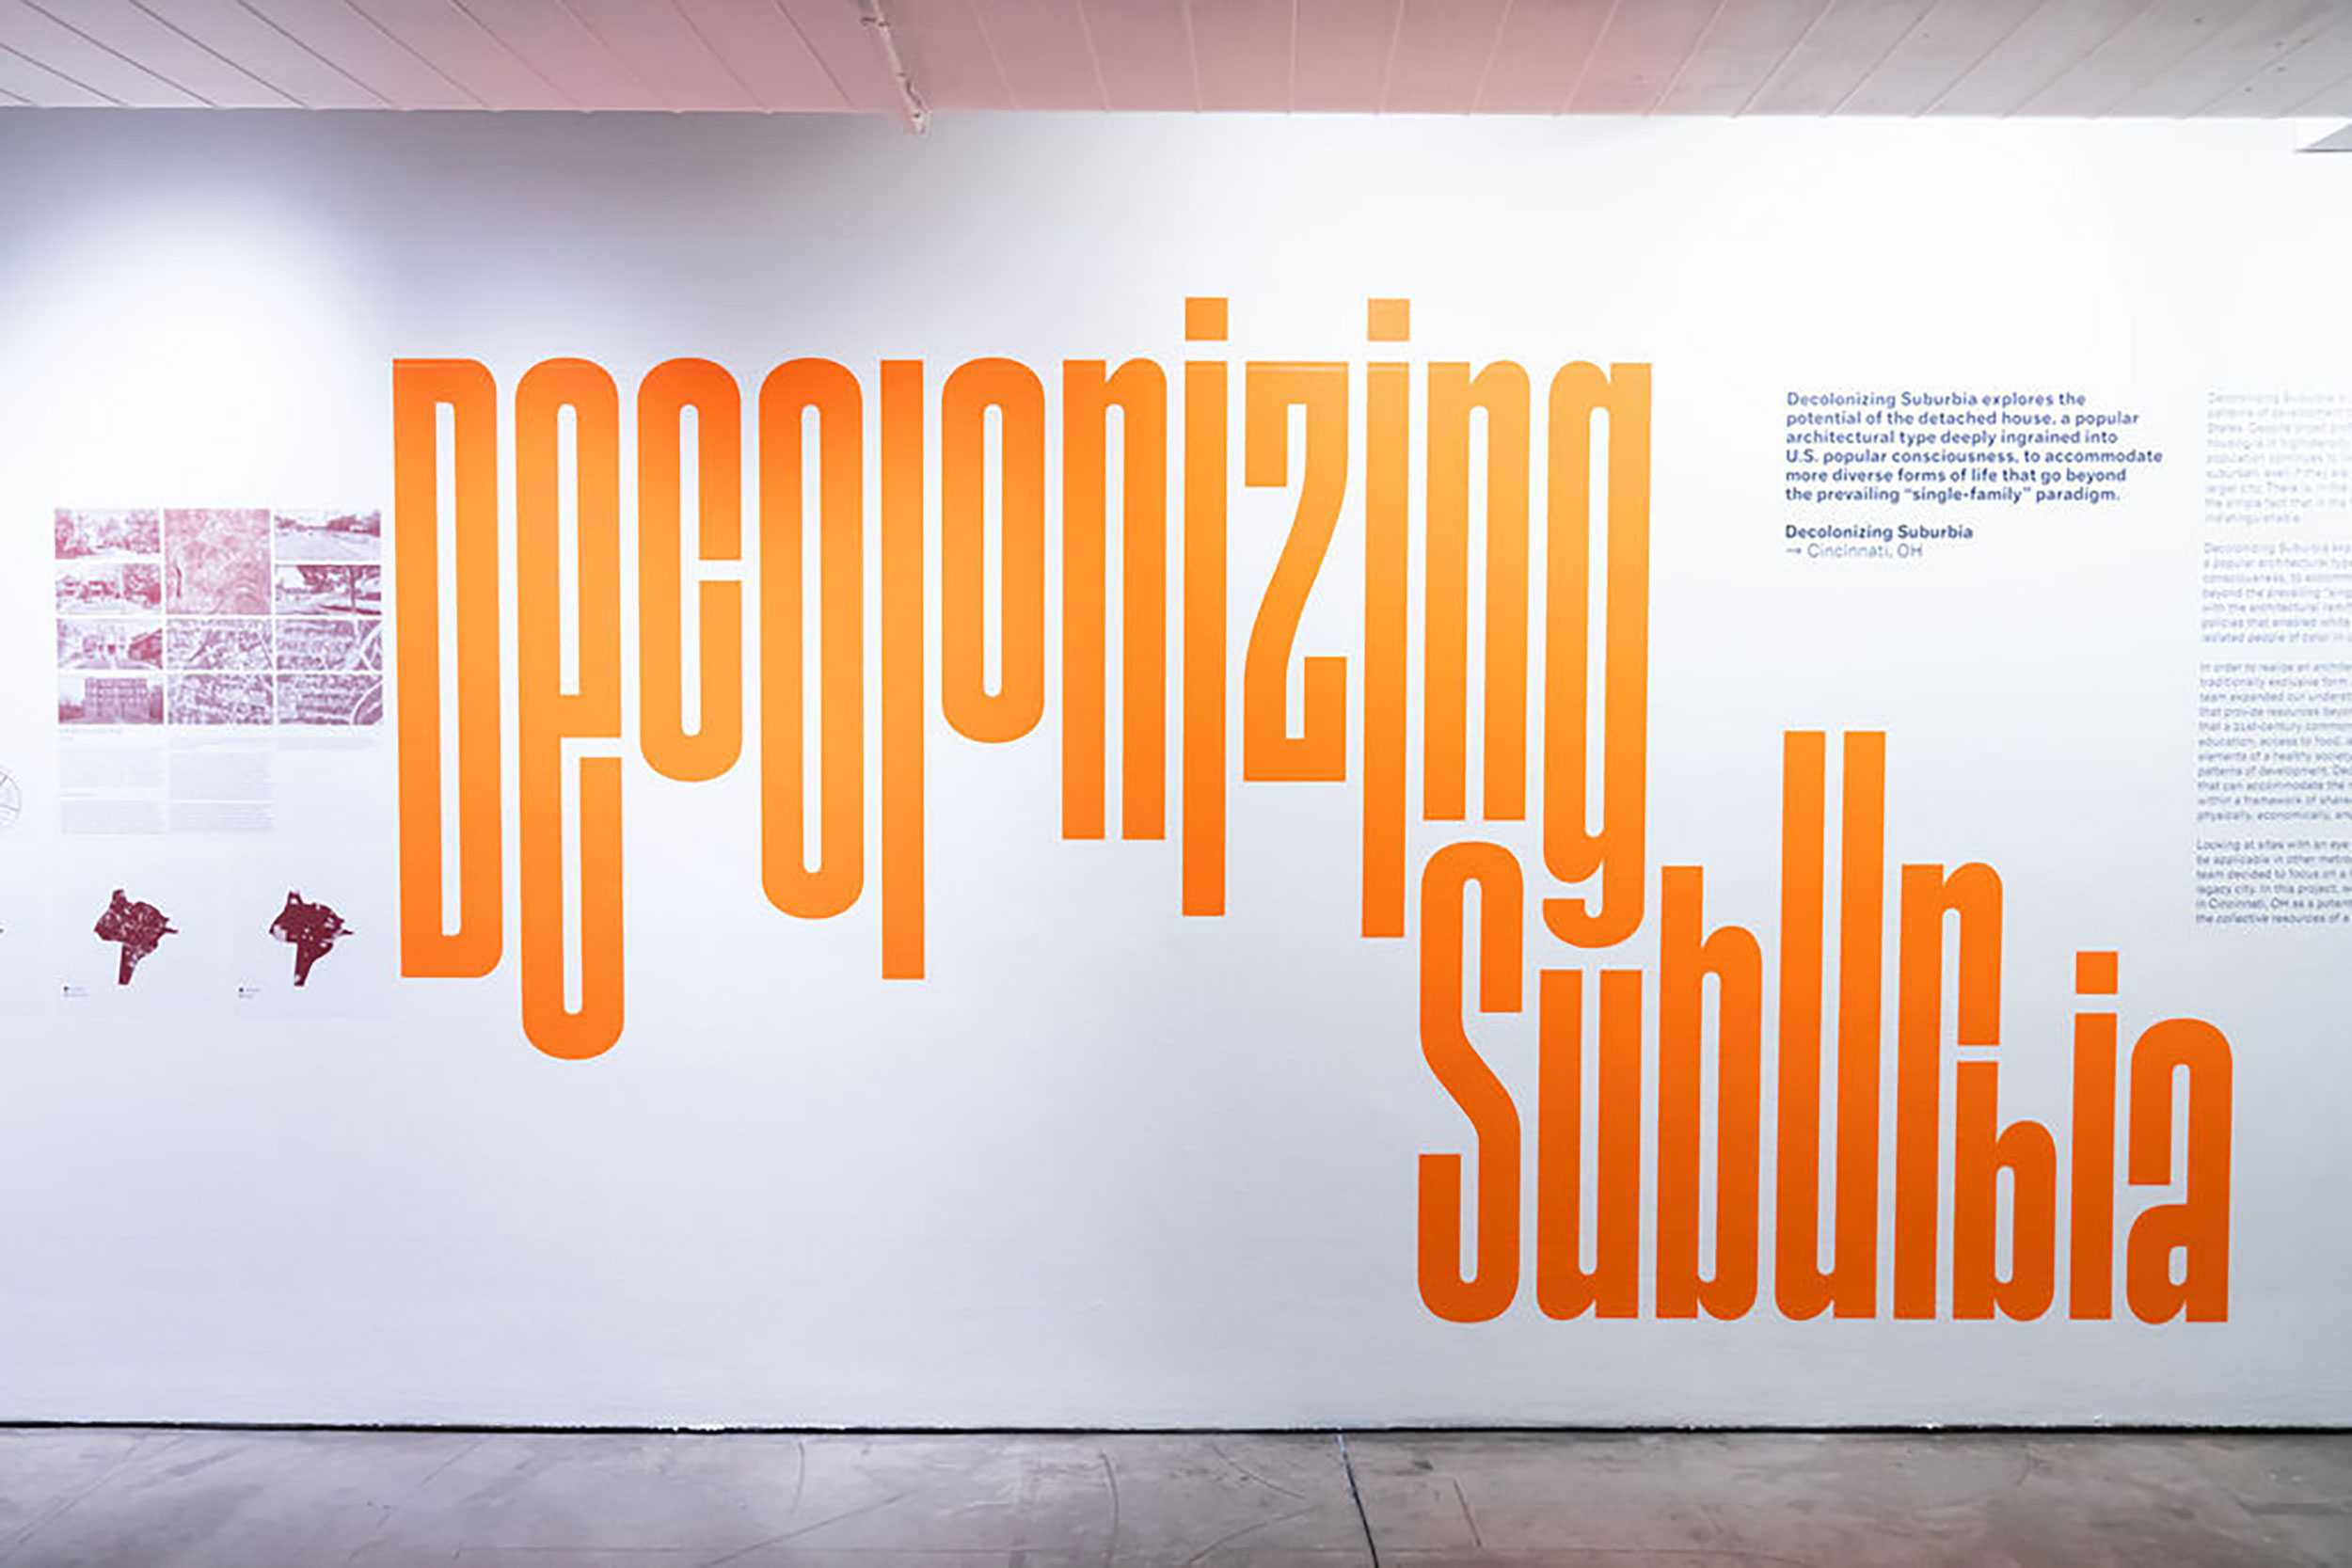 Installation view of a white gallery wall with large orange text and smaller black text.